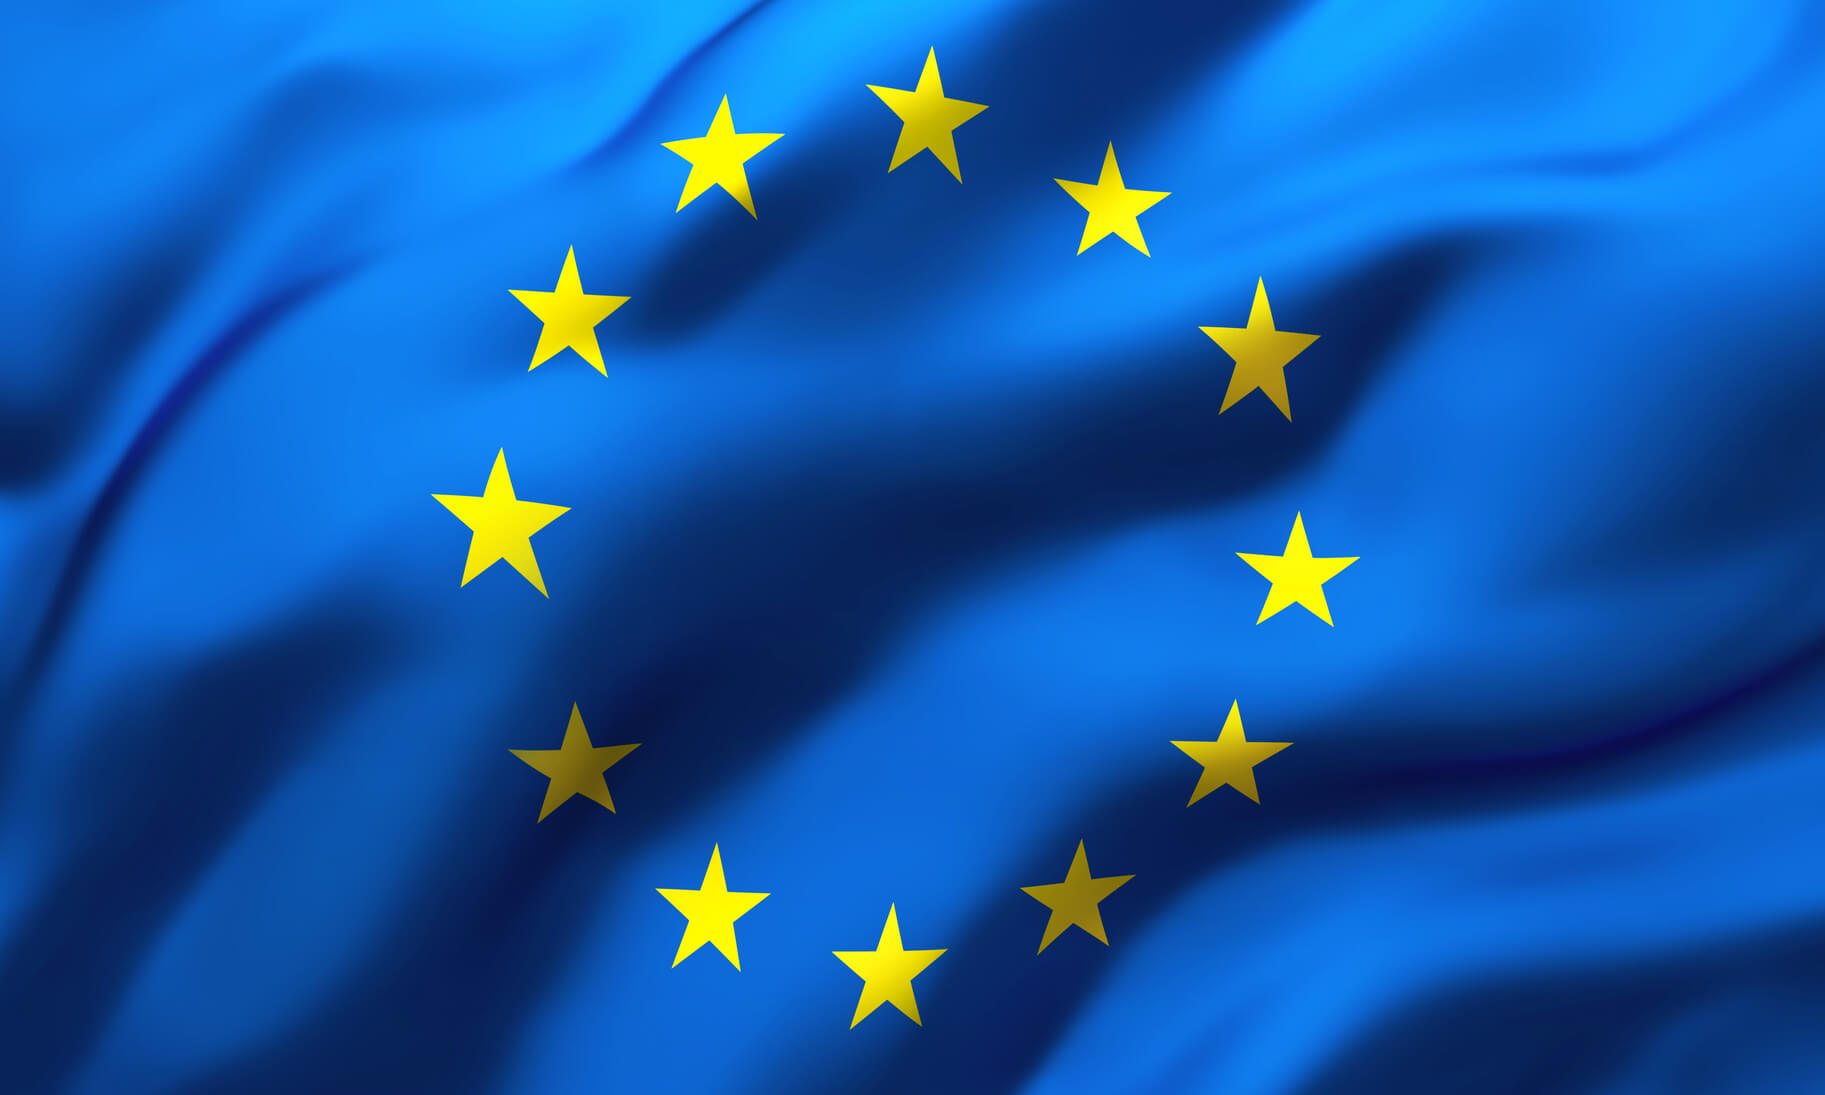 Potential Section 301 Duty Against the European Union